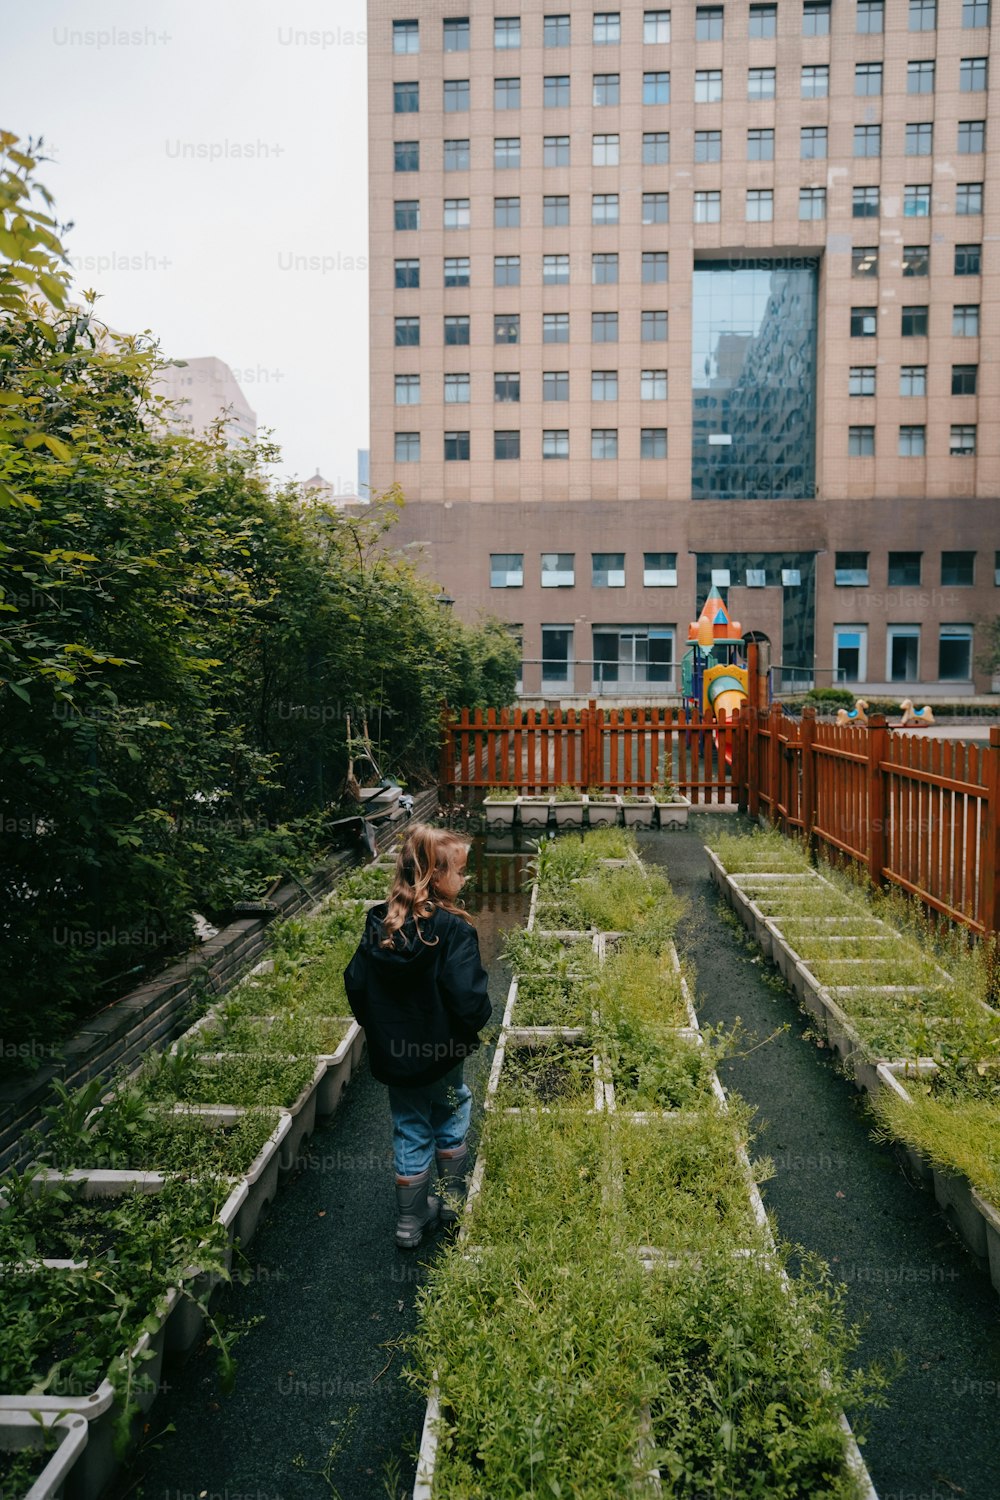 a young child walking through a garden in front of a tall building